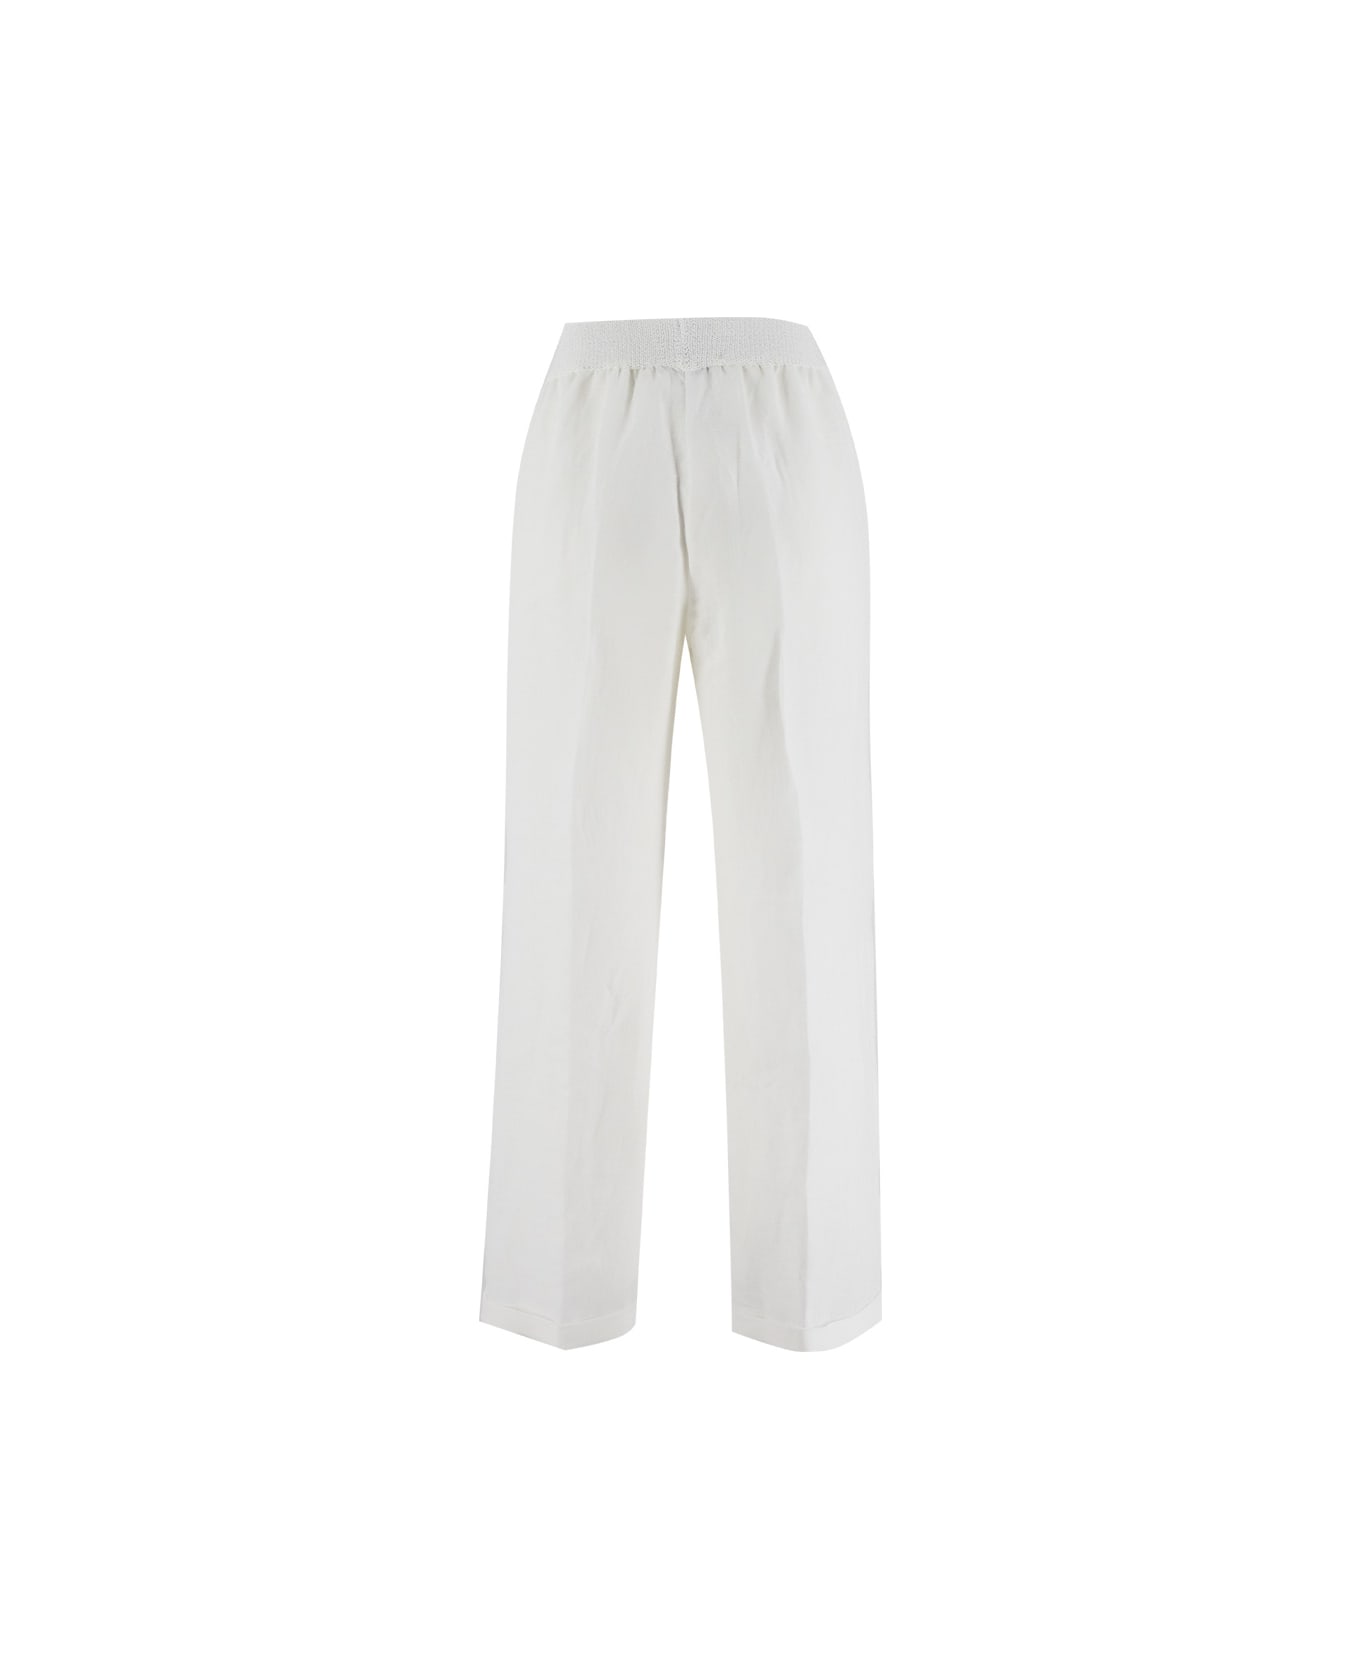 Le Tricot Perugia Trousers eng - WHITE